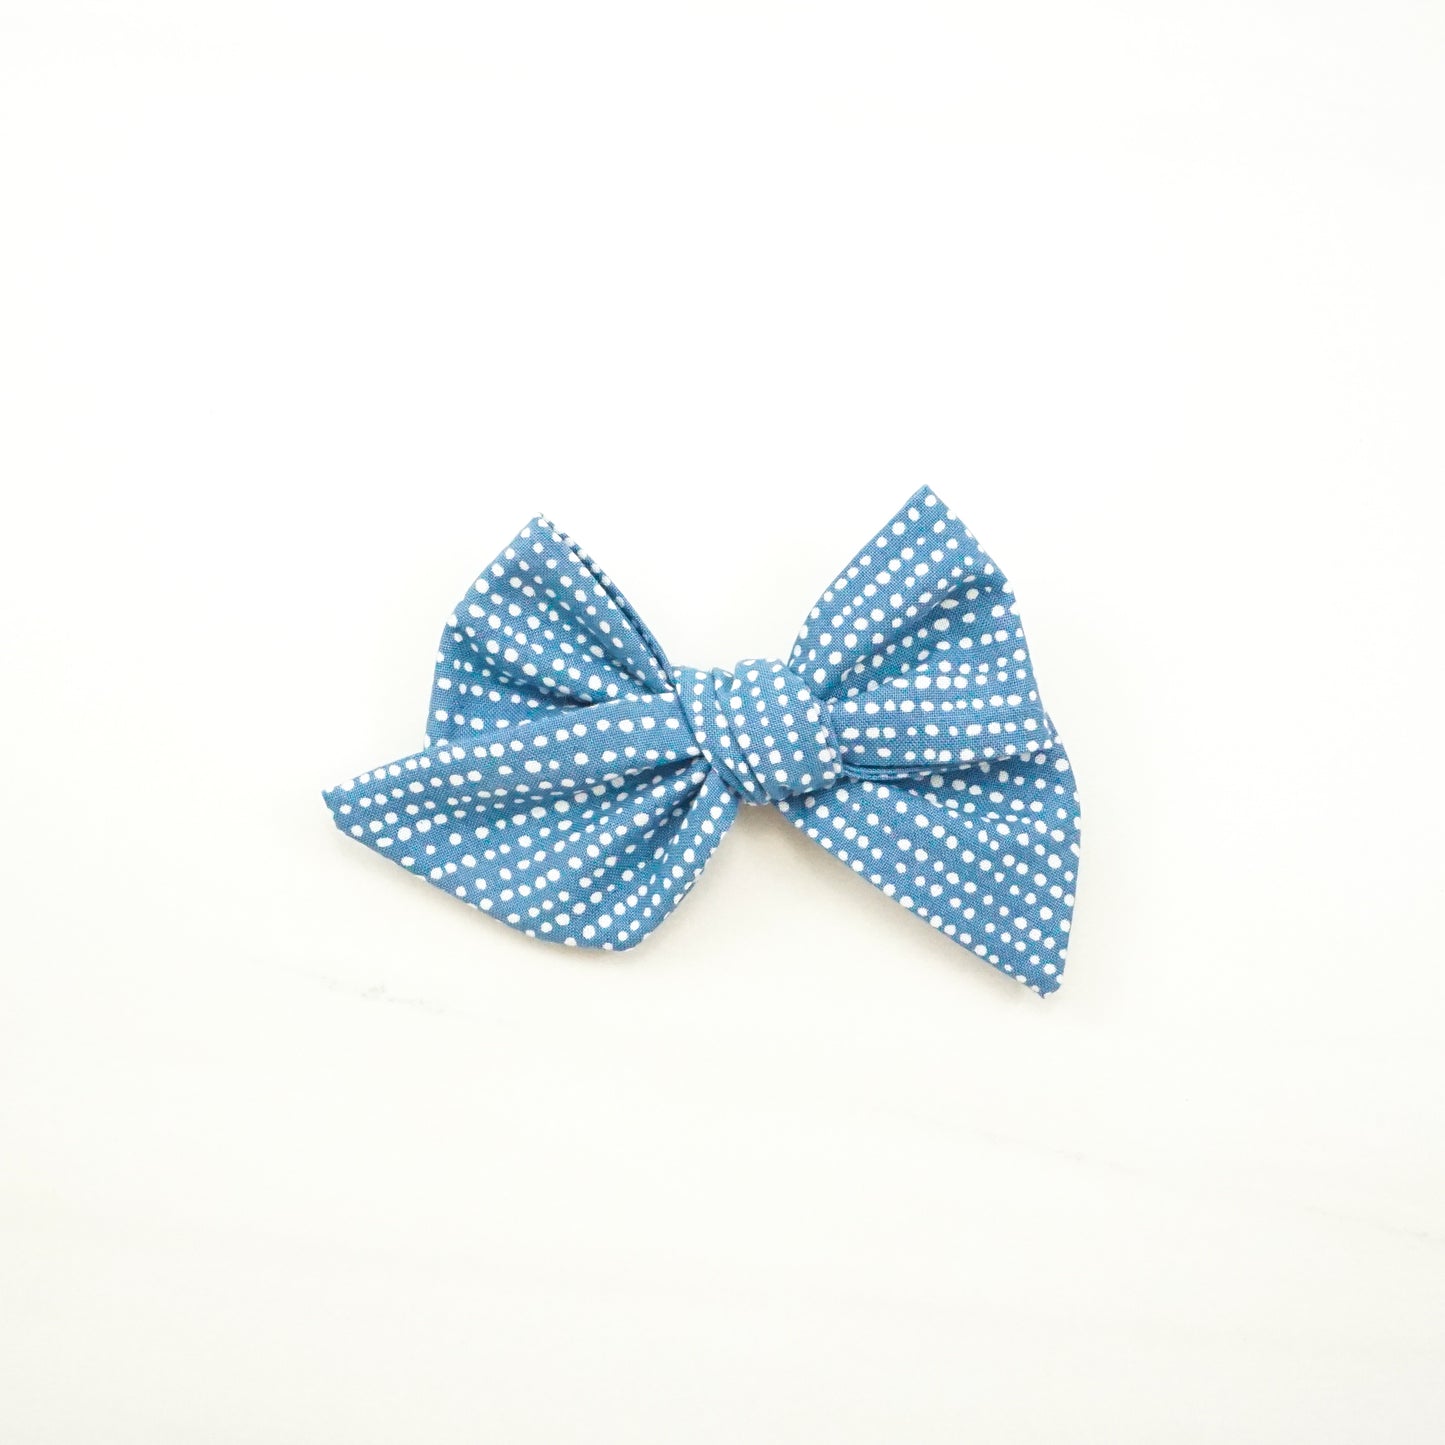 Handtied Fabric Bow - Ready to Ship (clip attached, see description) - Blue Snowfall